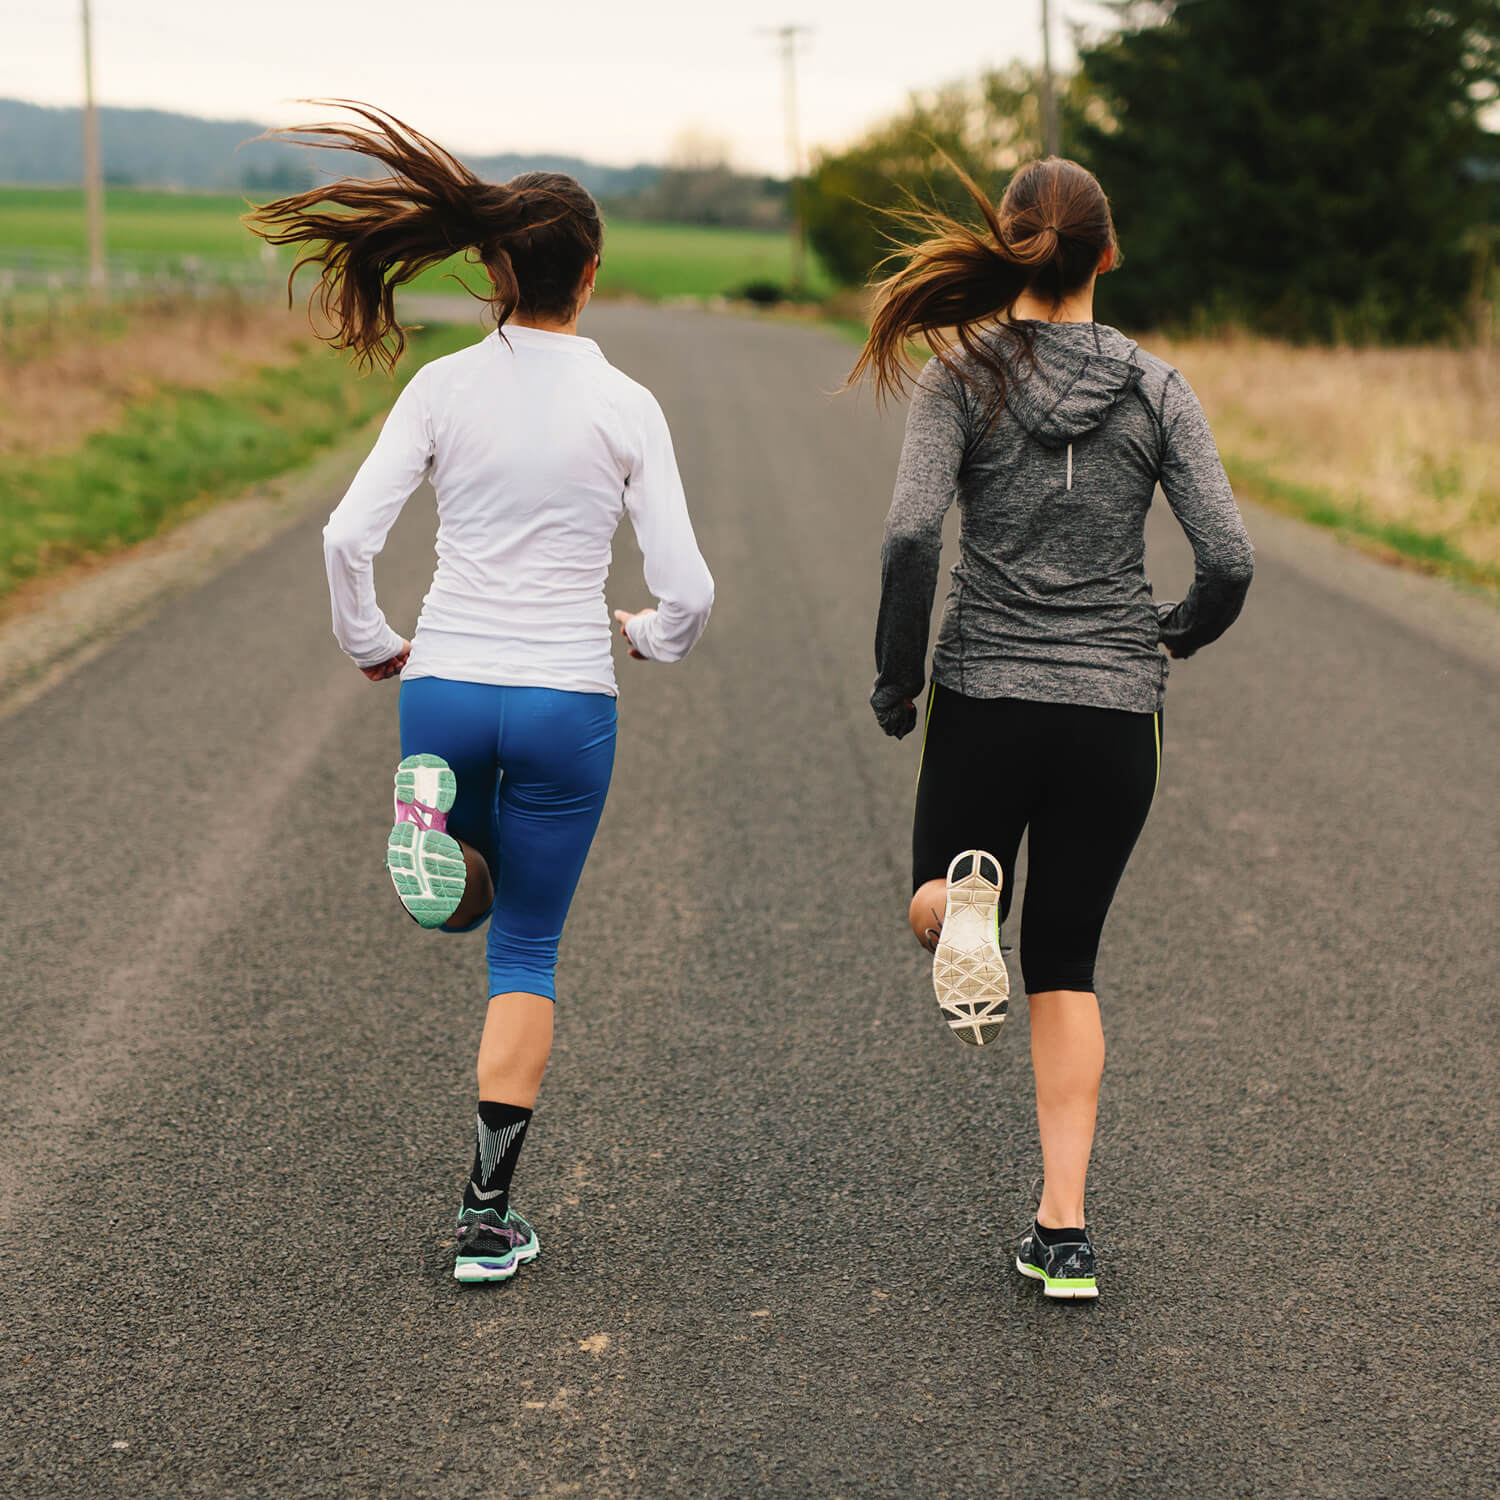 2 women running together down a road. 